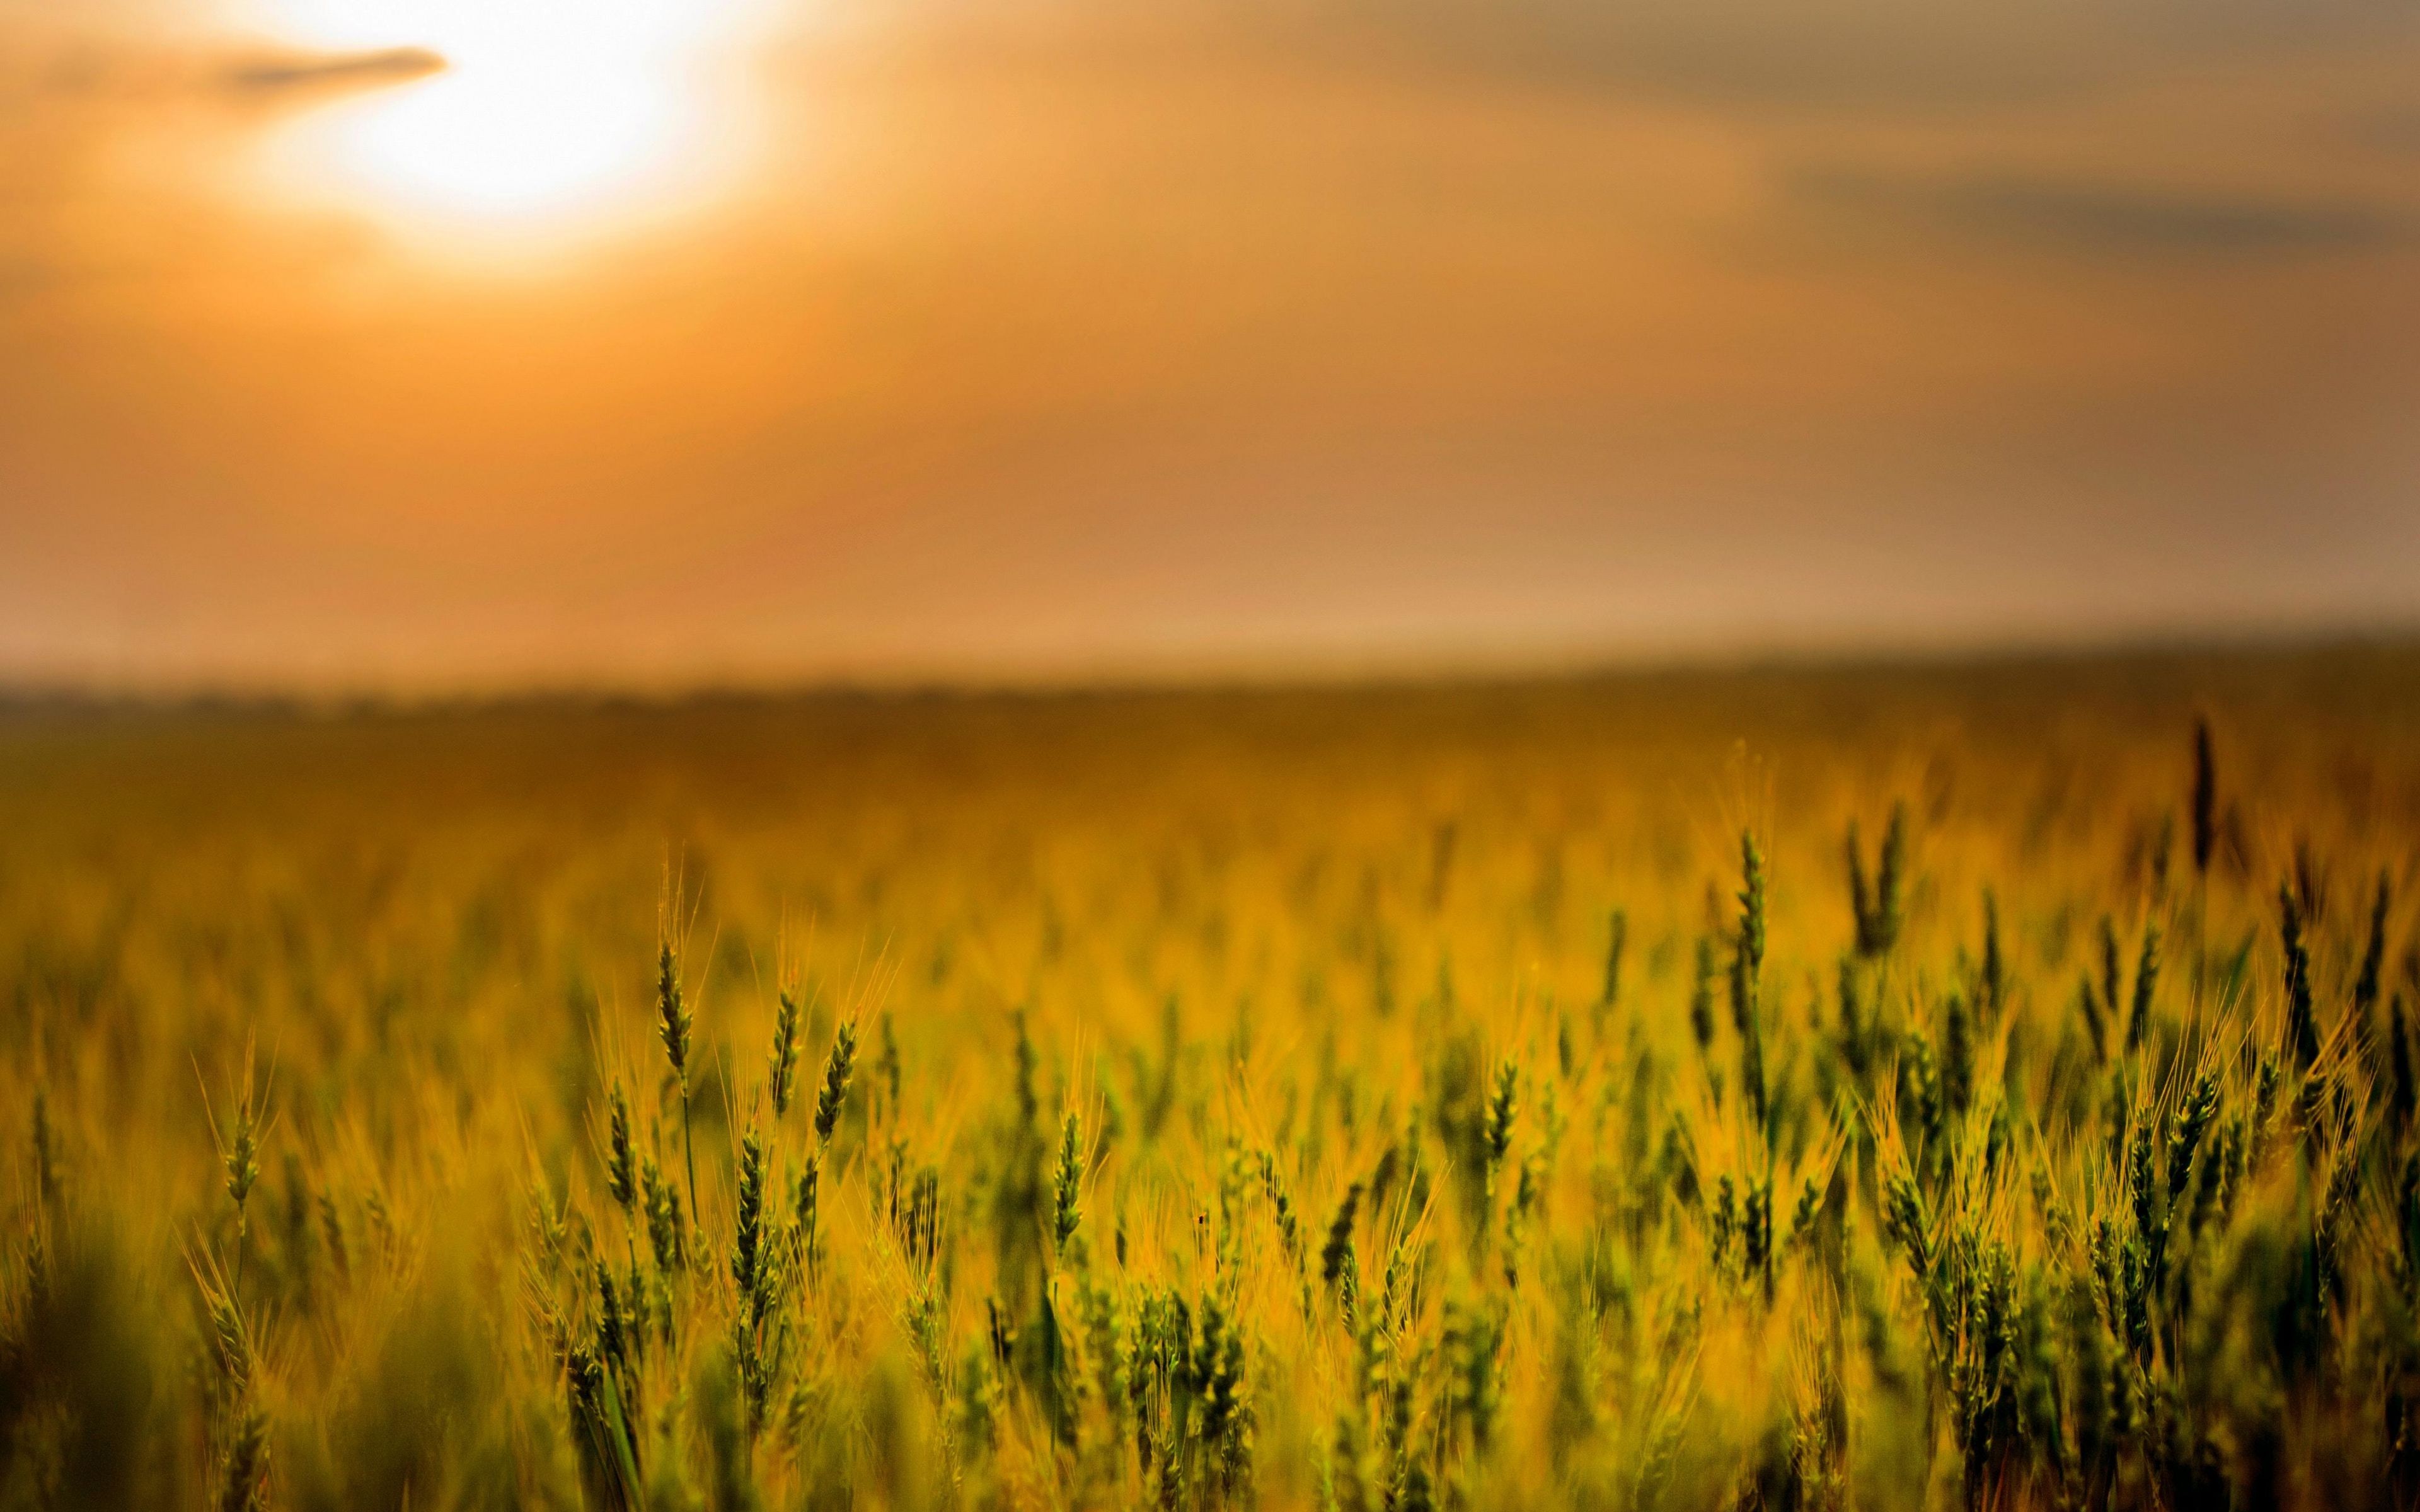 Download 3840x2400 wallpaper agriculture, cereal, corn farm, sunset, 4k, ultra HD 16: widescreen, 3840x2400 HD image, background, 9333